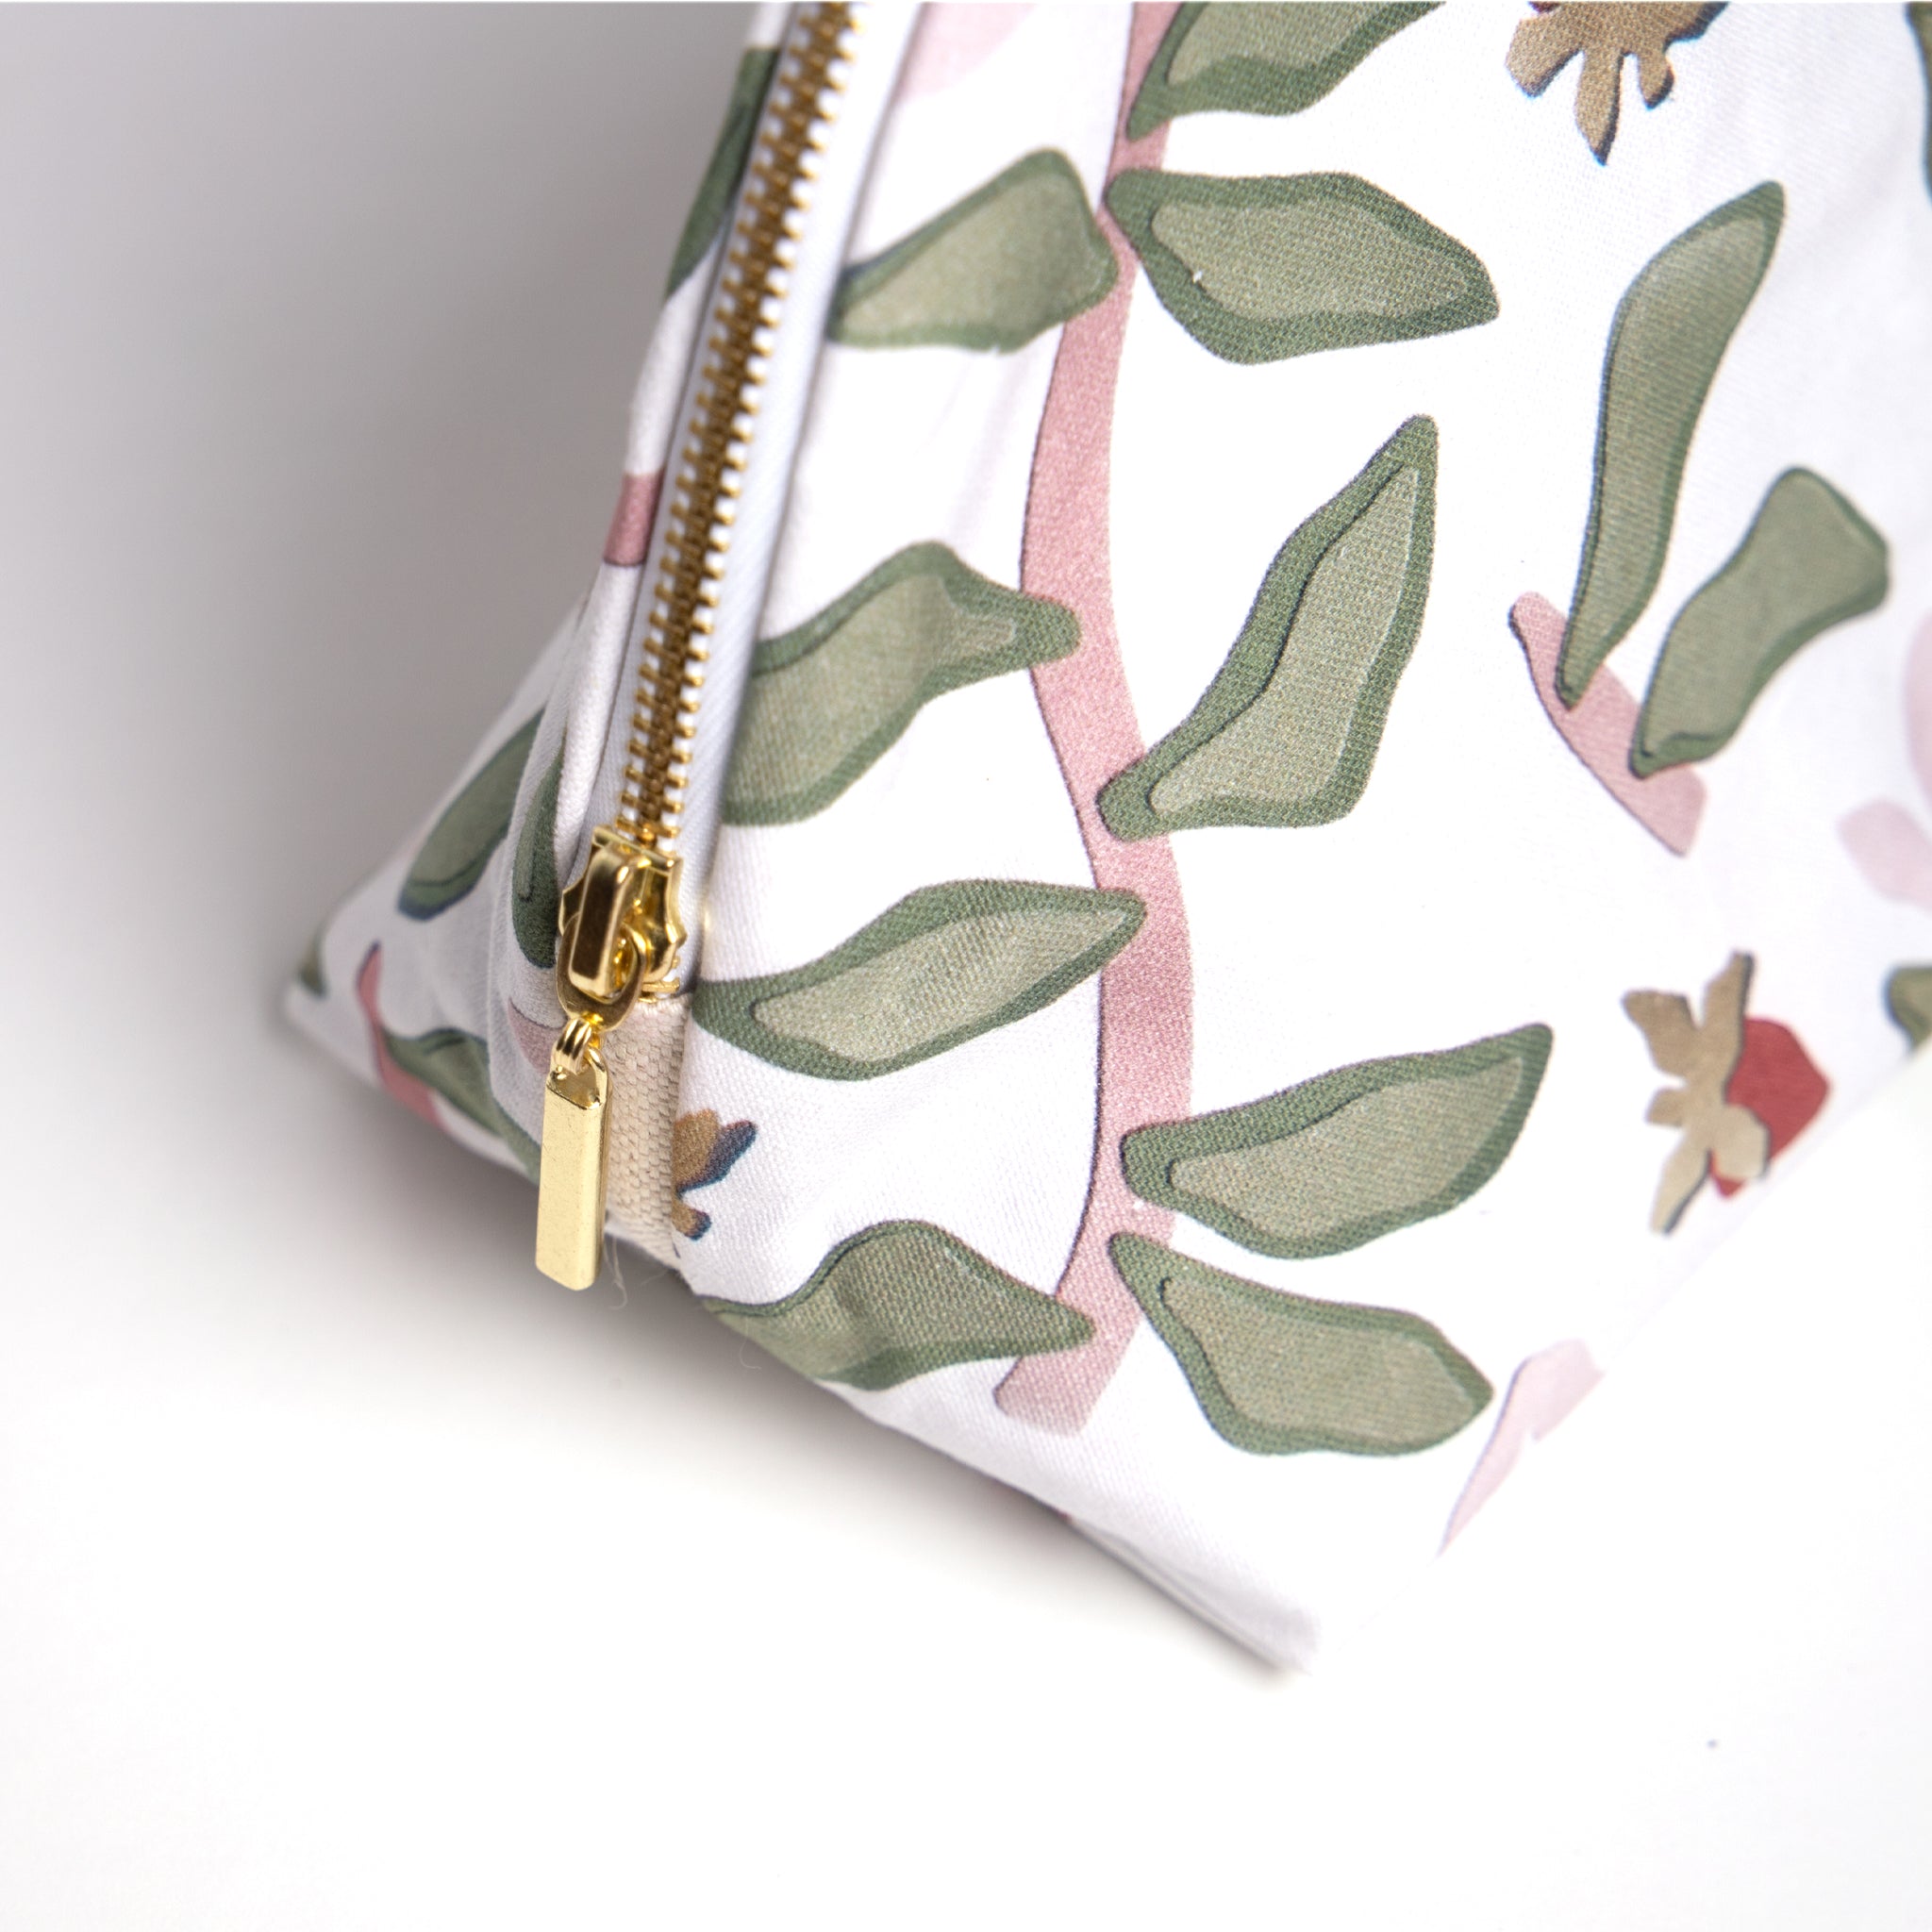 Close-up of Gold Zipper on Strawberry & Botanical Printed Monogrammed Pouch